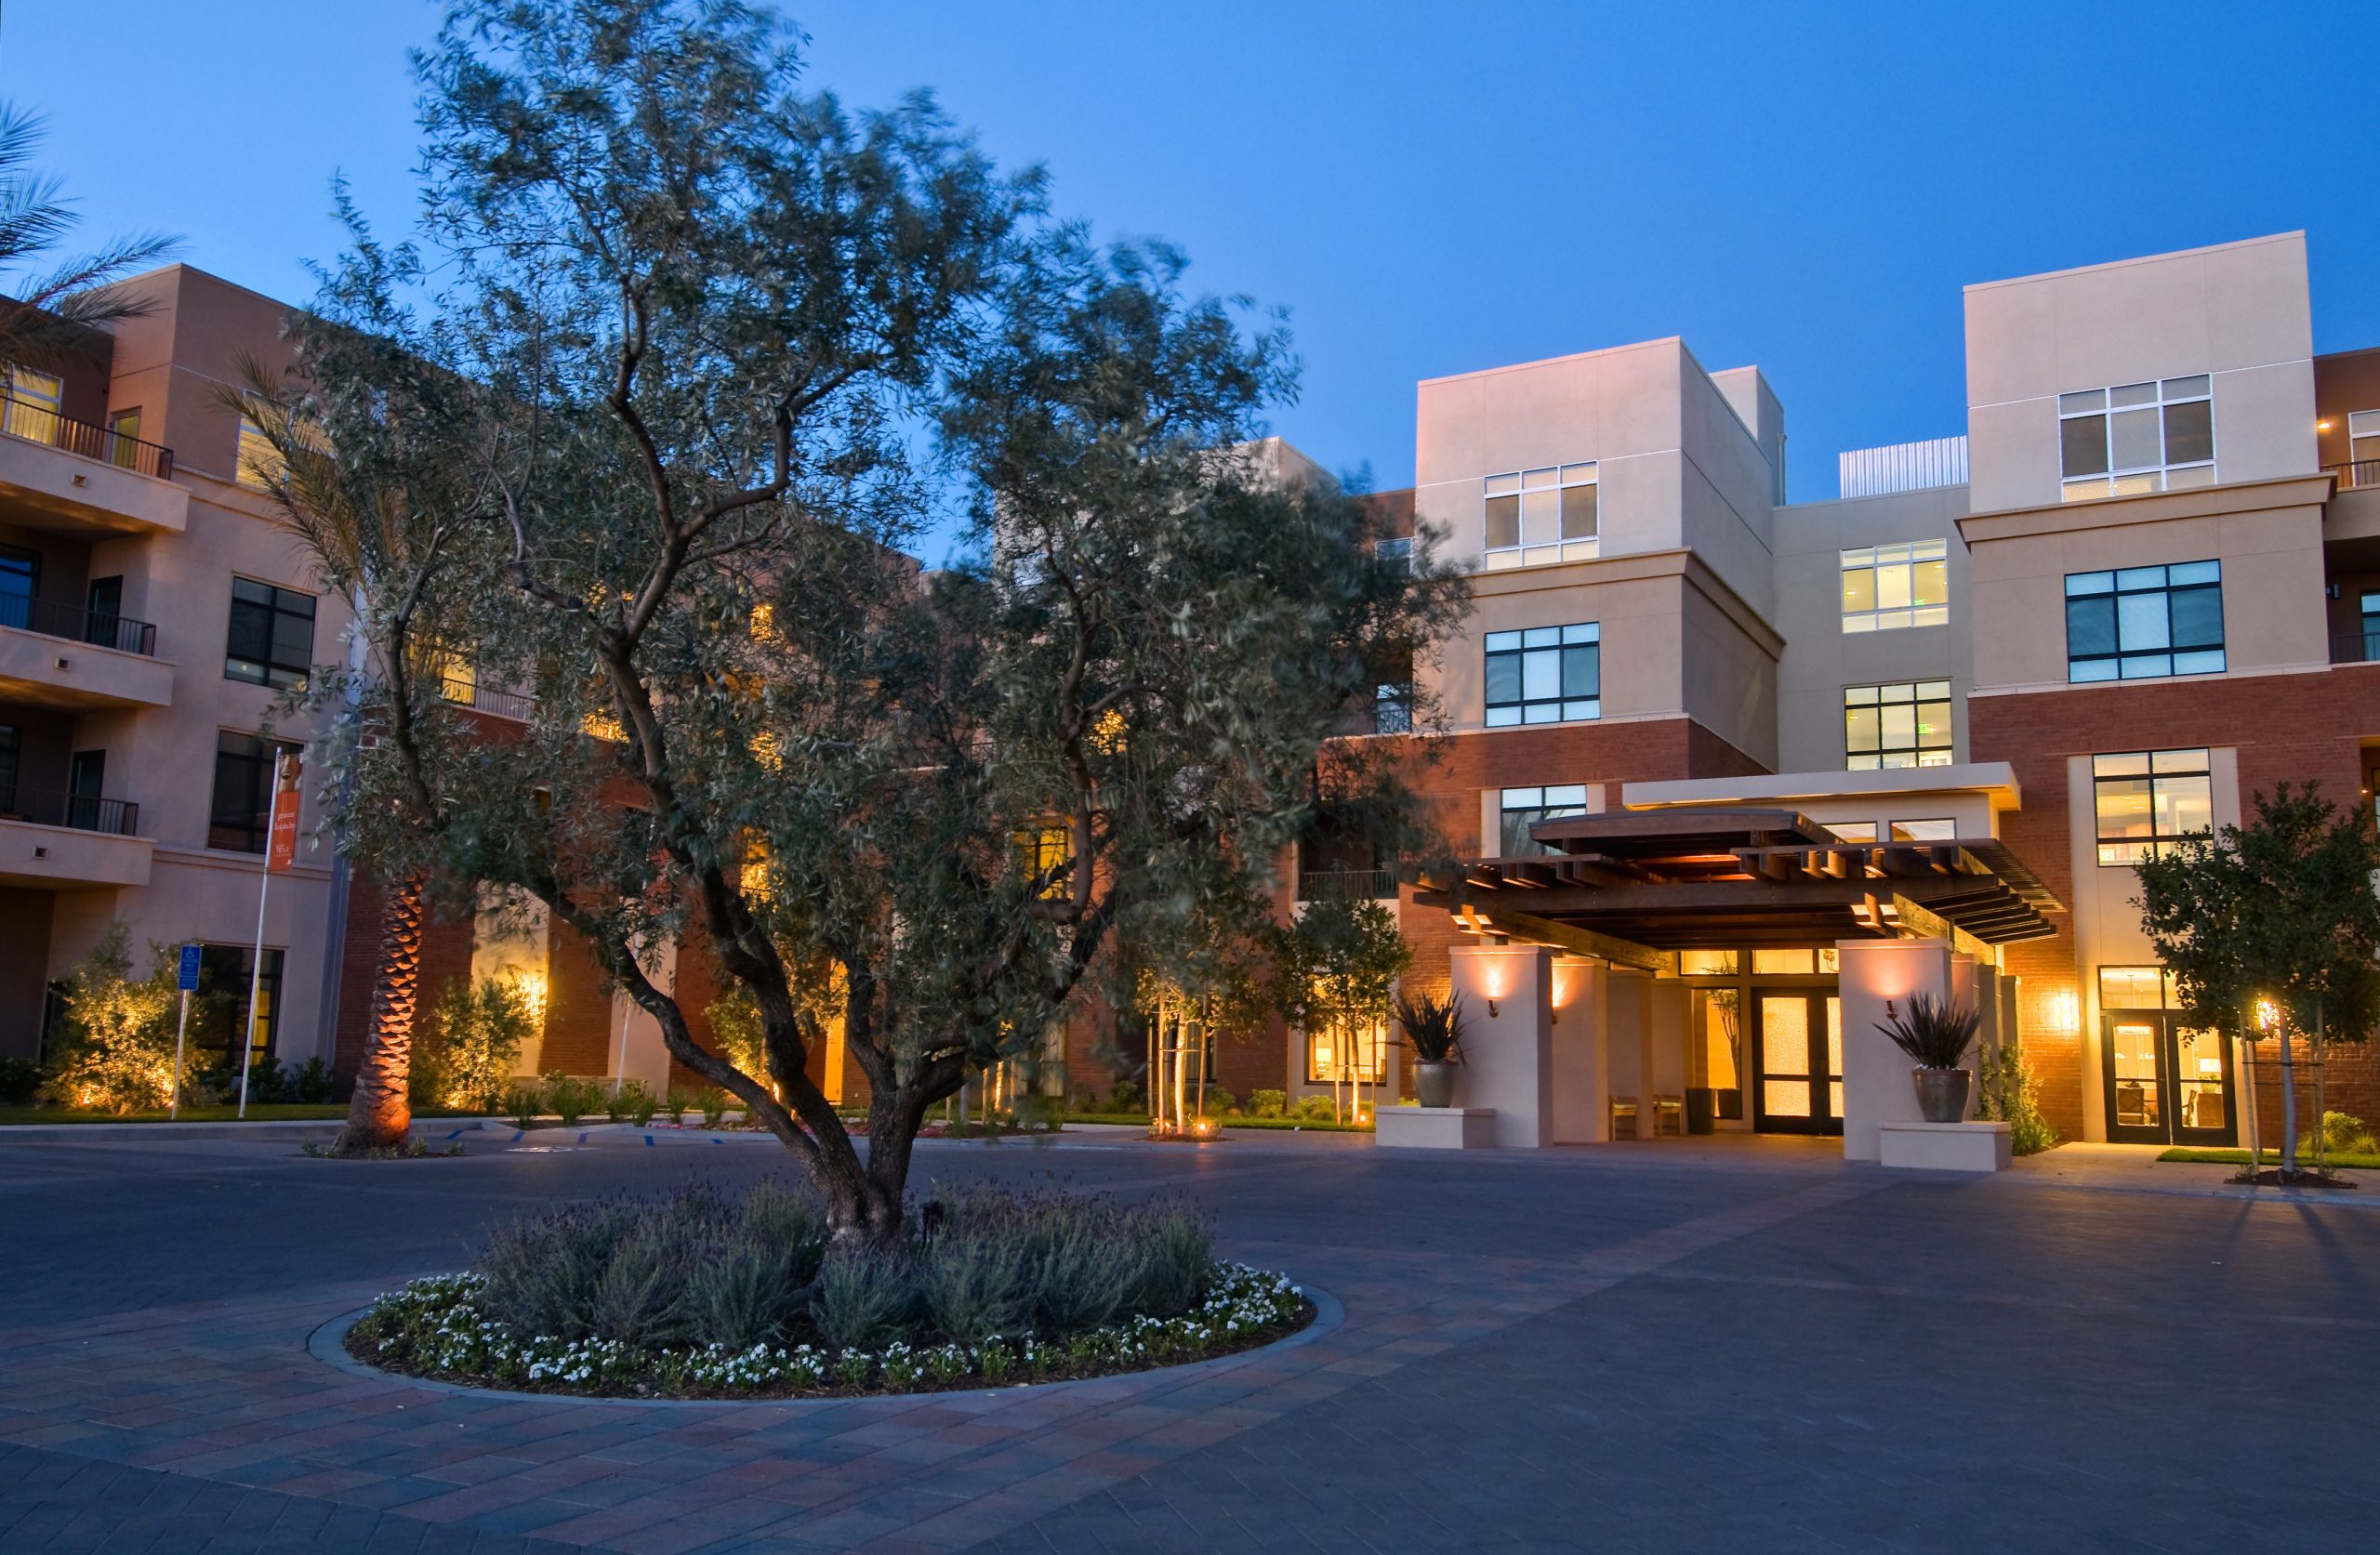 Night view of the courtyard at Northridge